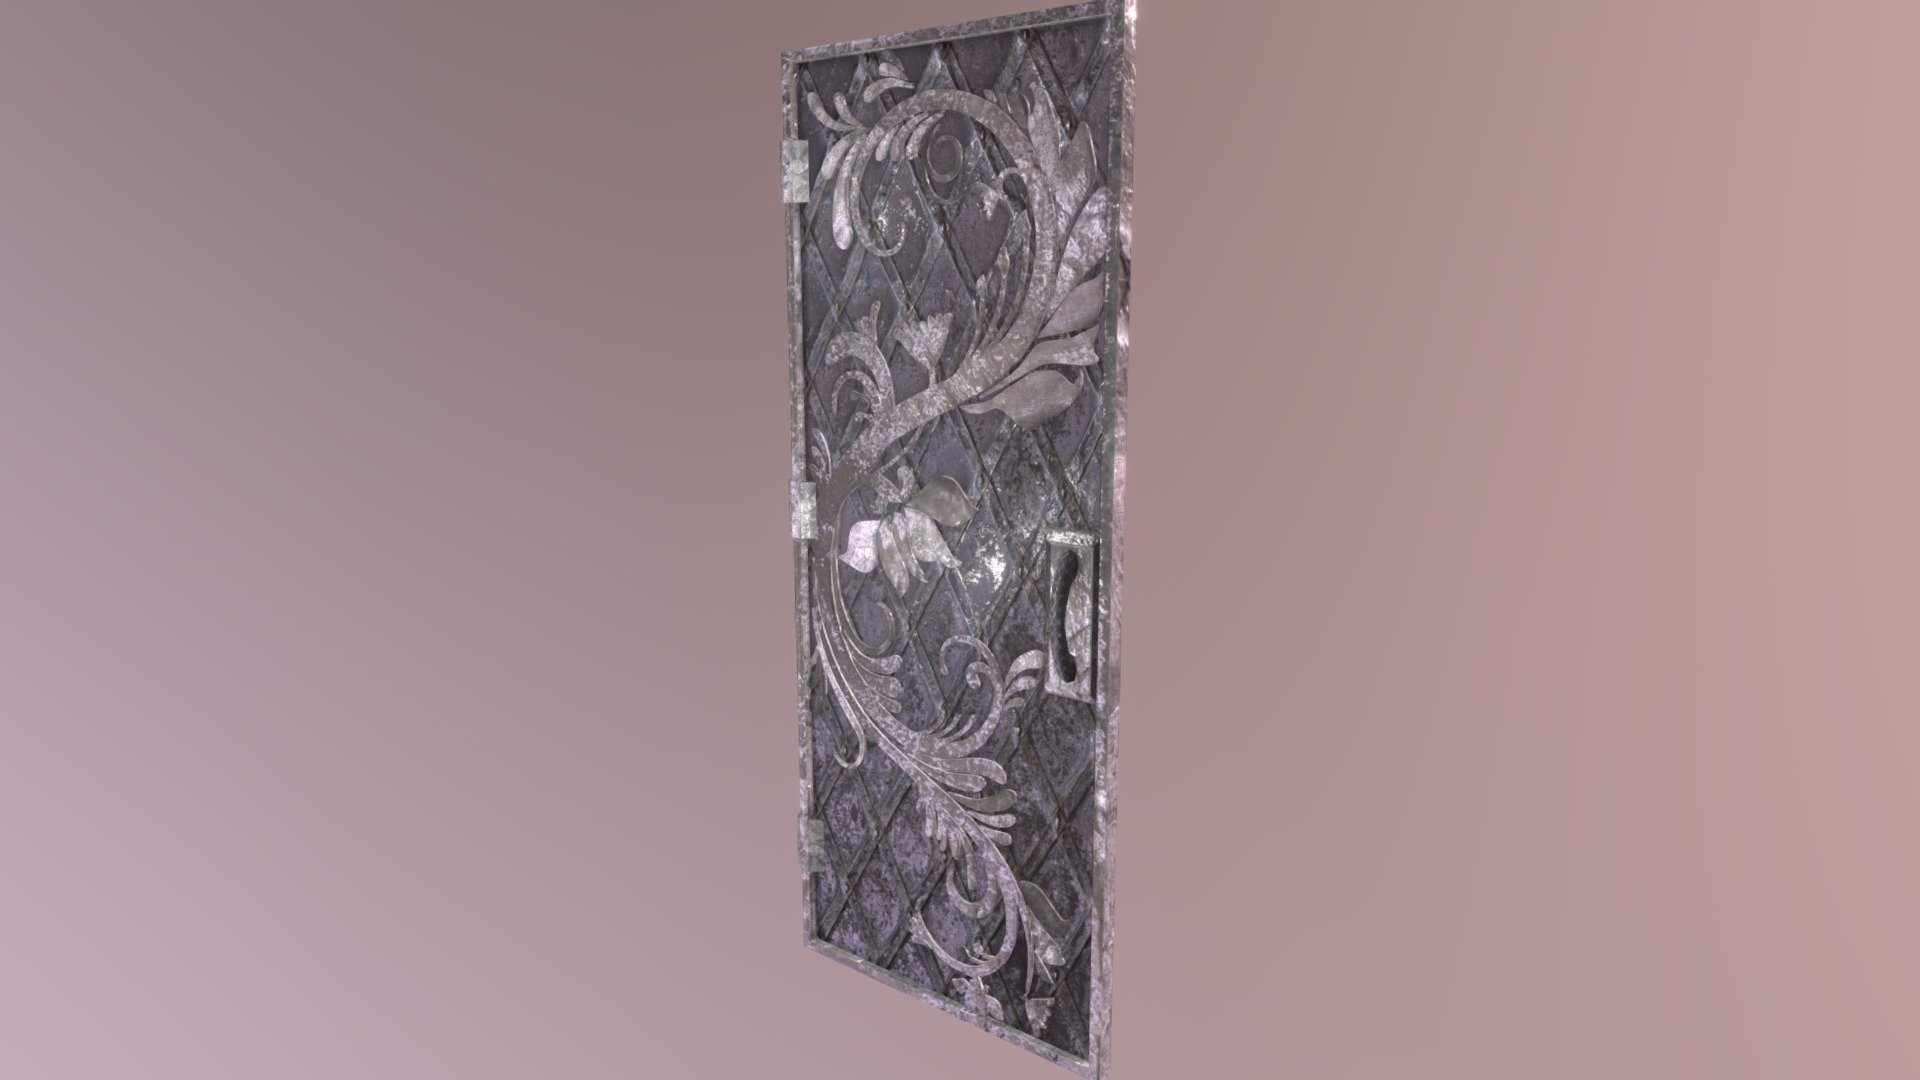 A metal door design meant for the noble-class in a fantasy setting.

File uploaded in .blend format, using Cycles Render. (High-poly) - Noble-Class Metal Door - 3D model by ShadowCrosserX 3d model